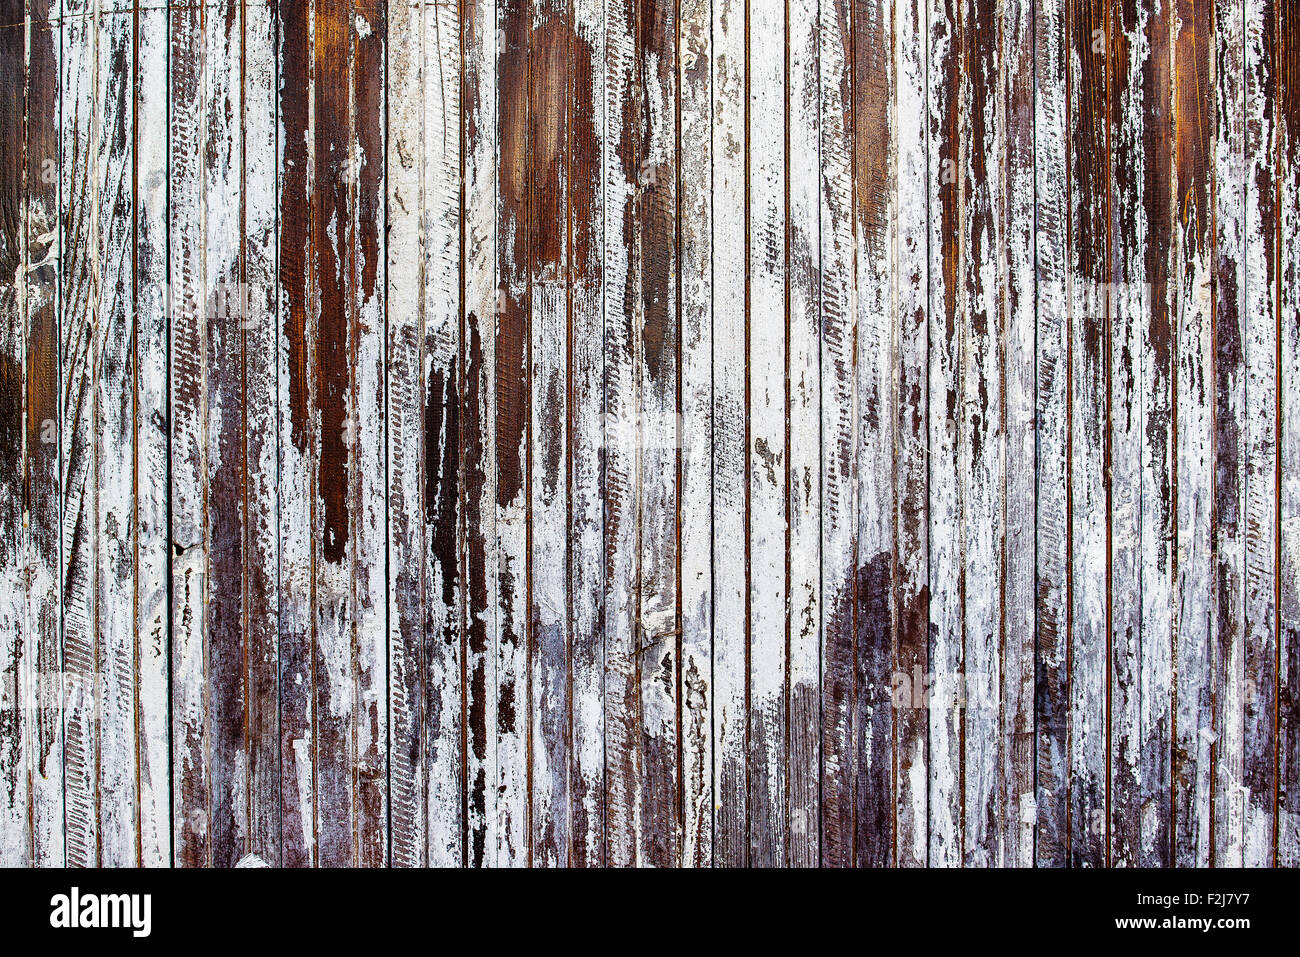 Old rustic wooden plank wall painted white, paint peel texture Stock Photo